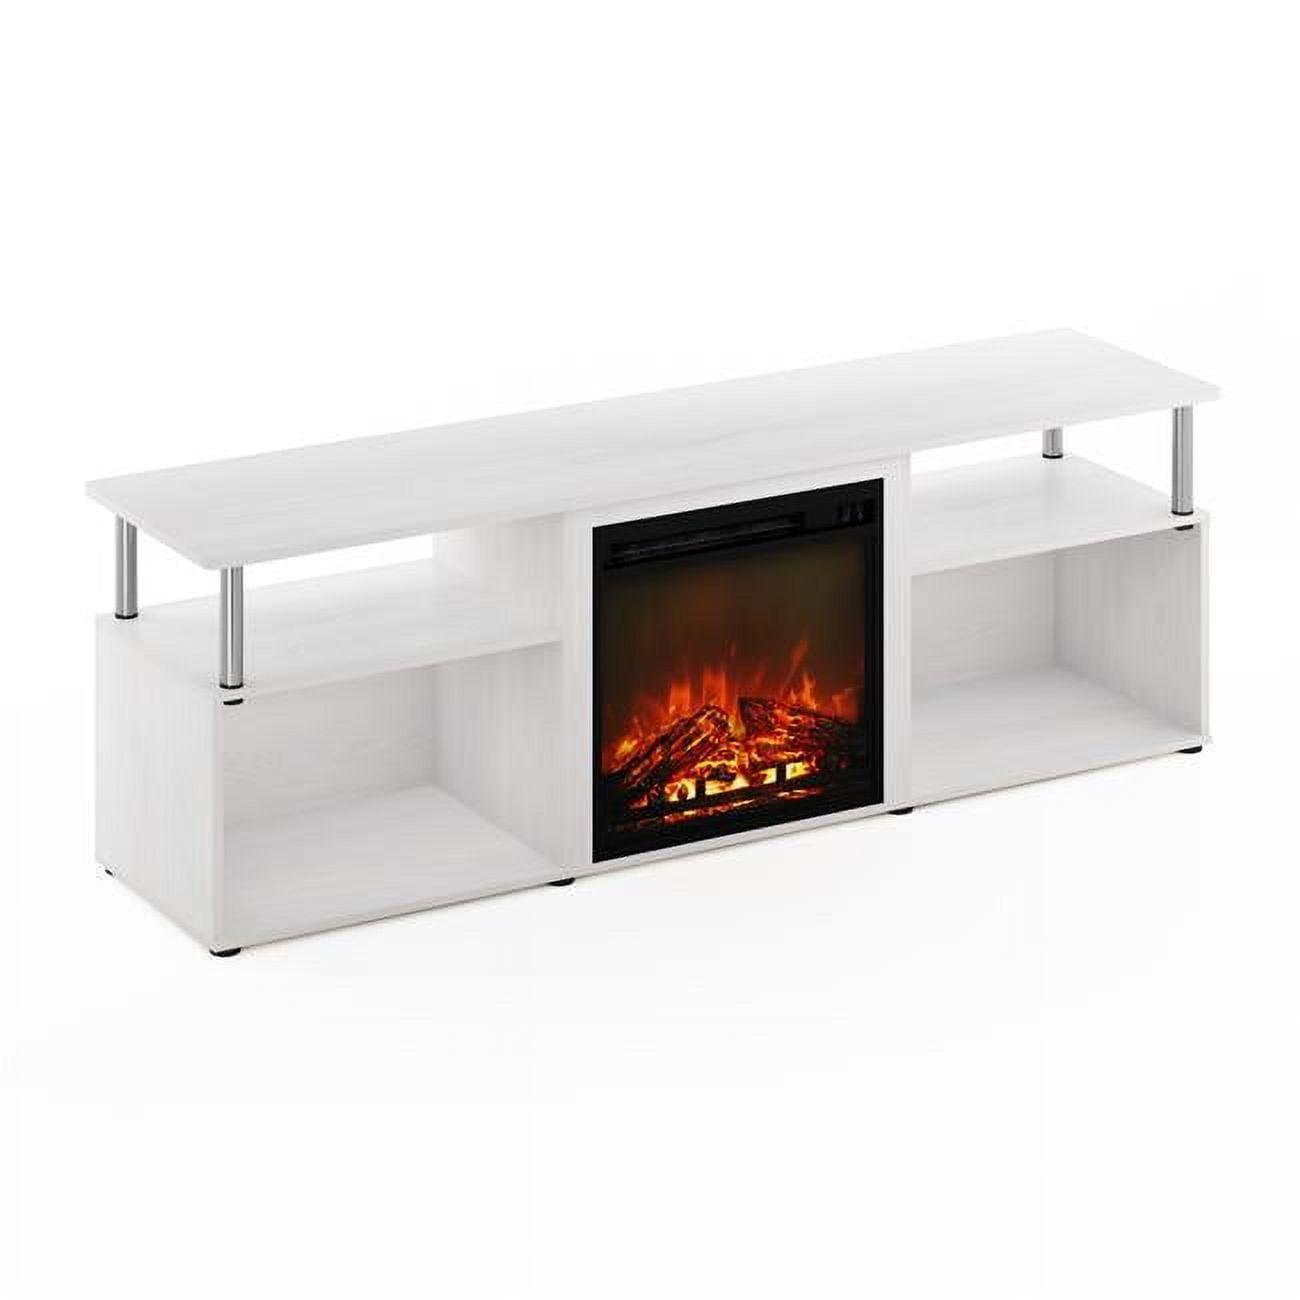 Sleek White Oak and Chrome 70'' TV Stand with Built-In Fireplace